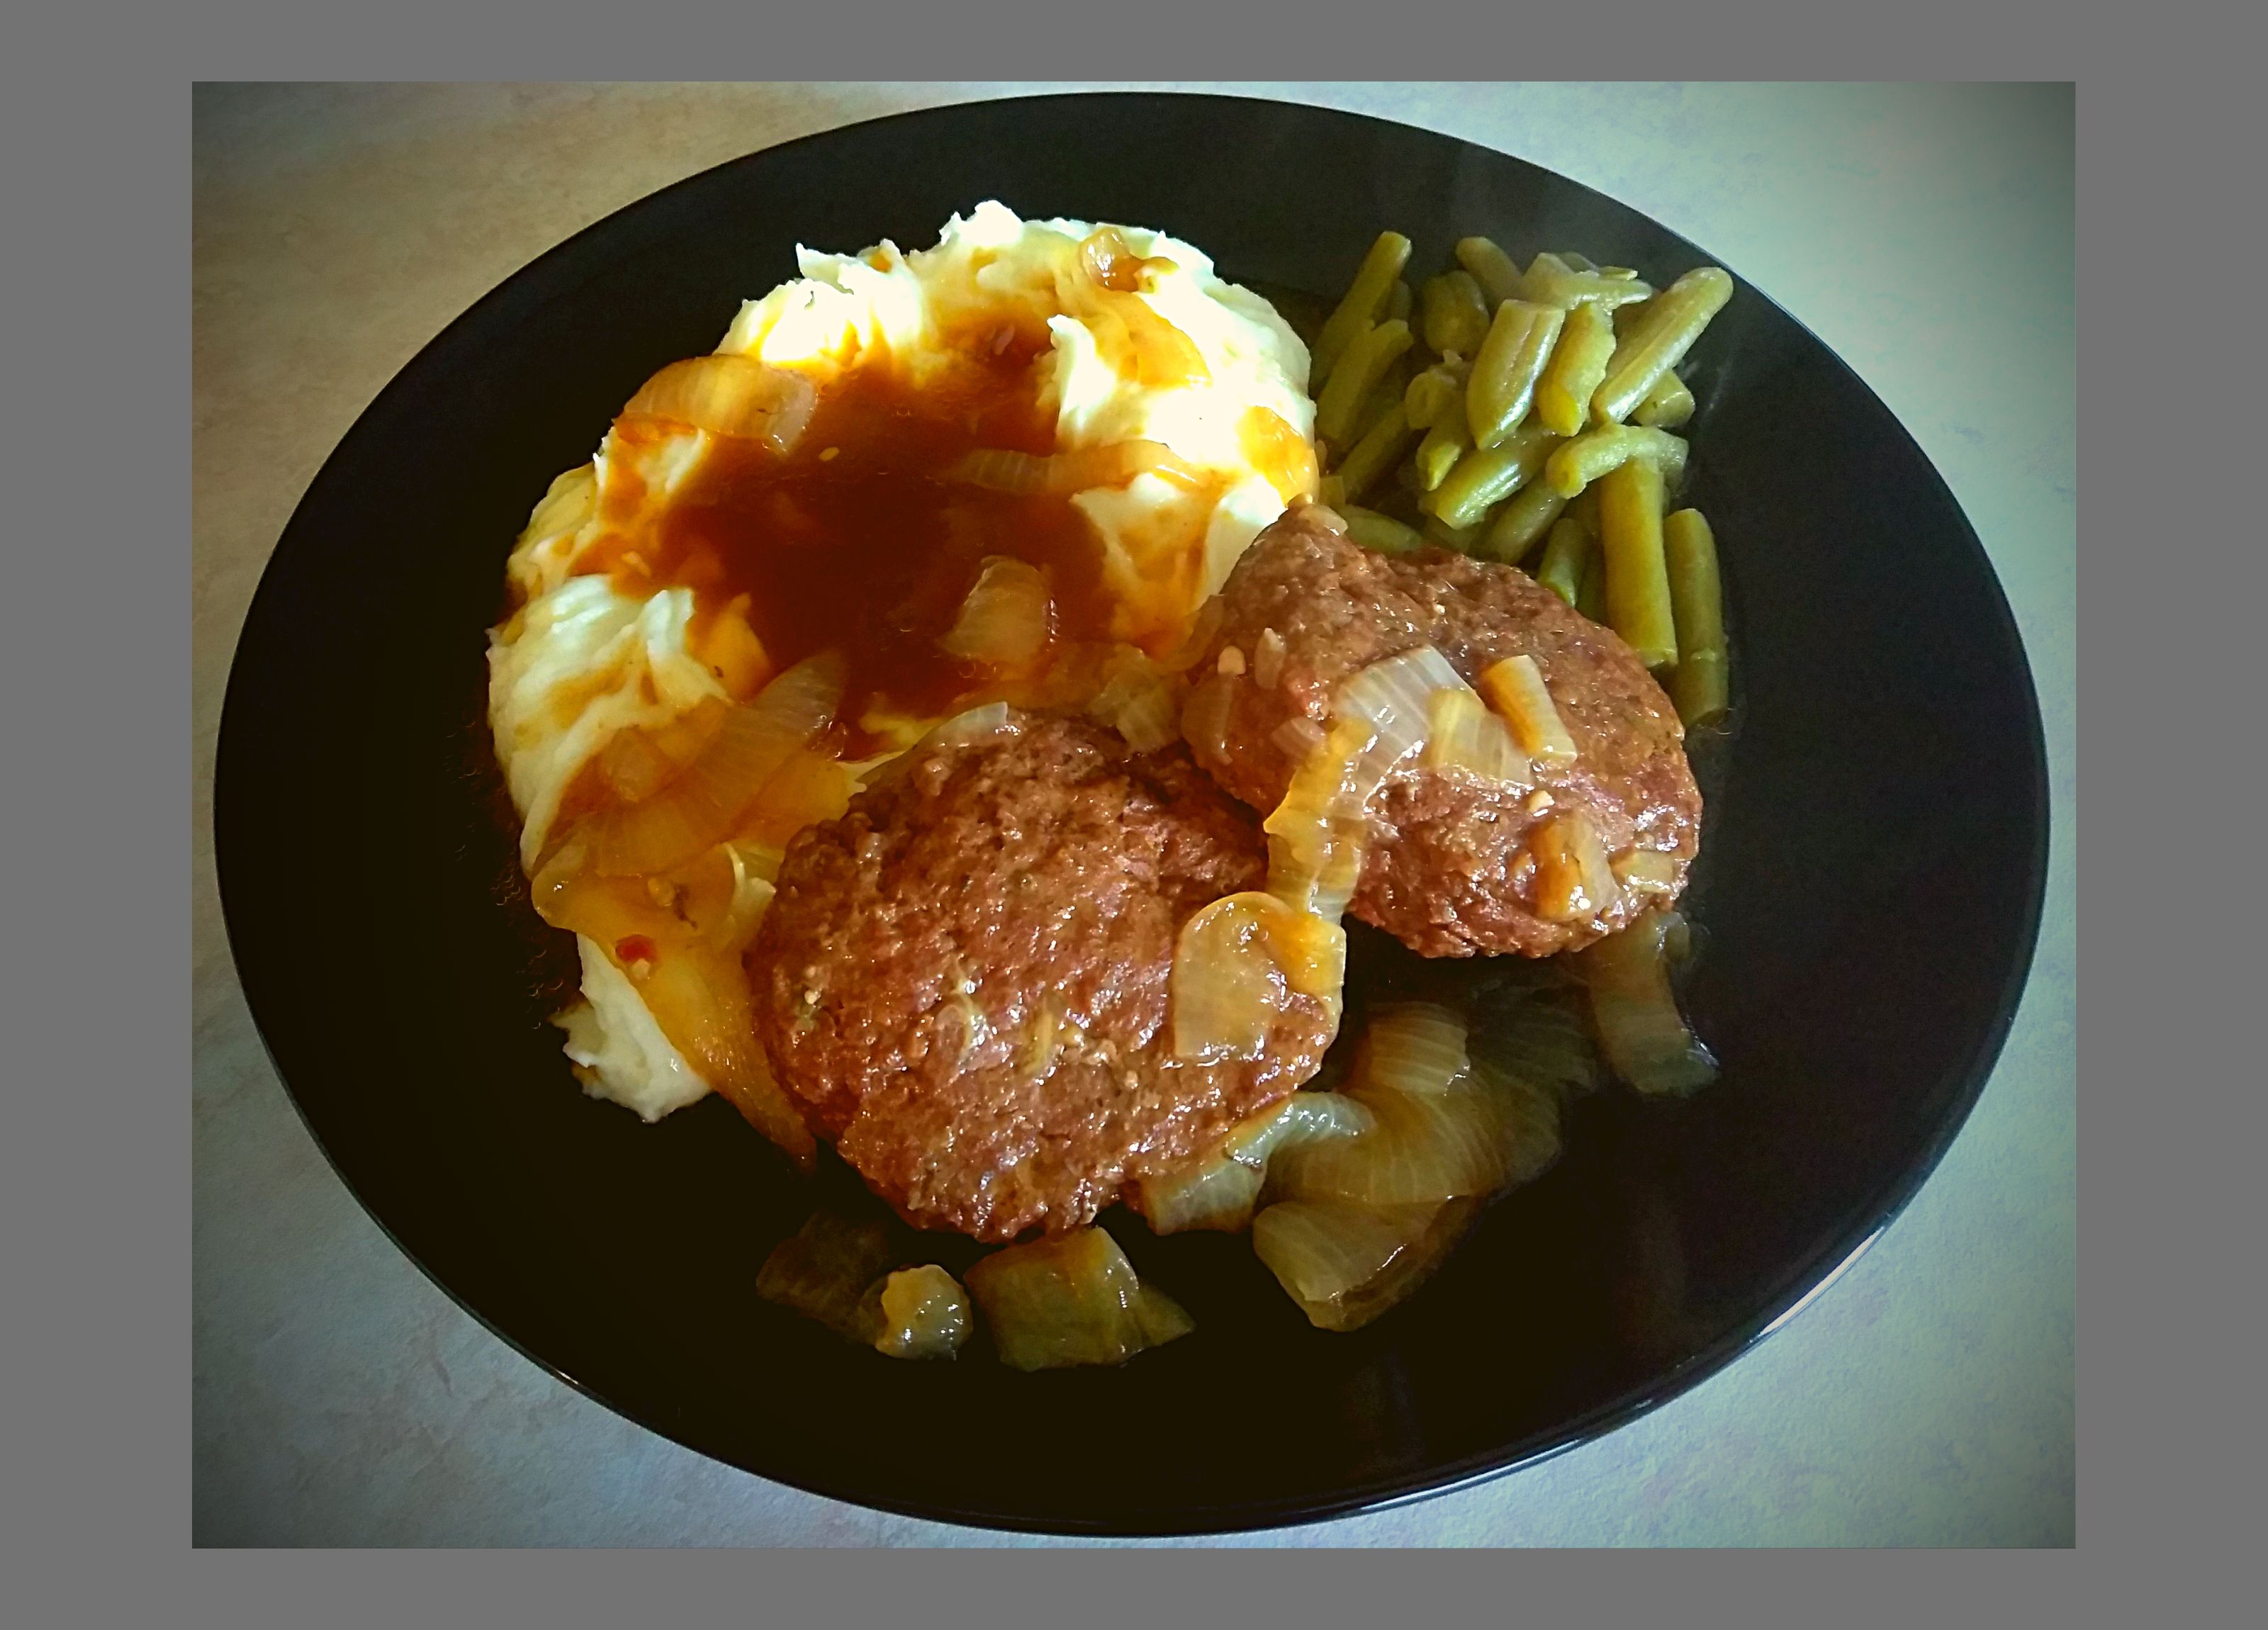 A black plate filled with instant Pot salisbury steak and greavy over mashed potatoes with green beans.